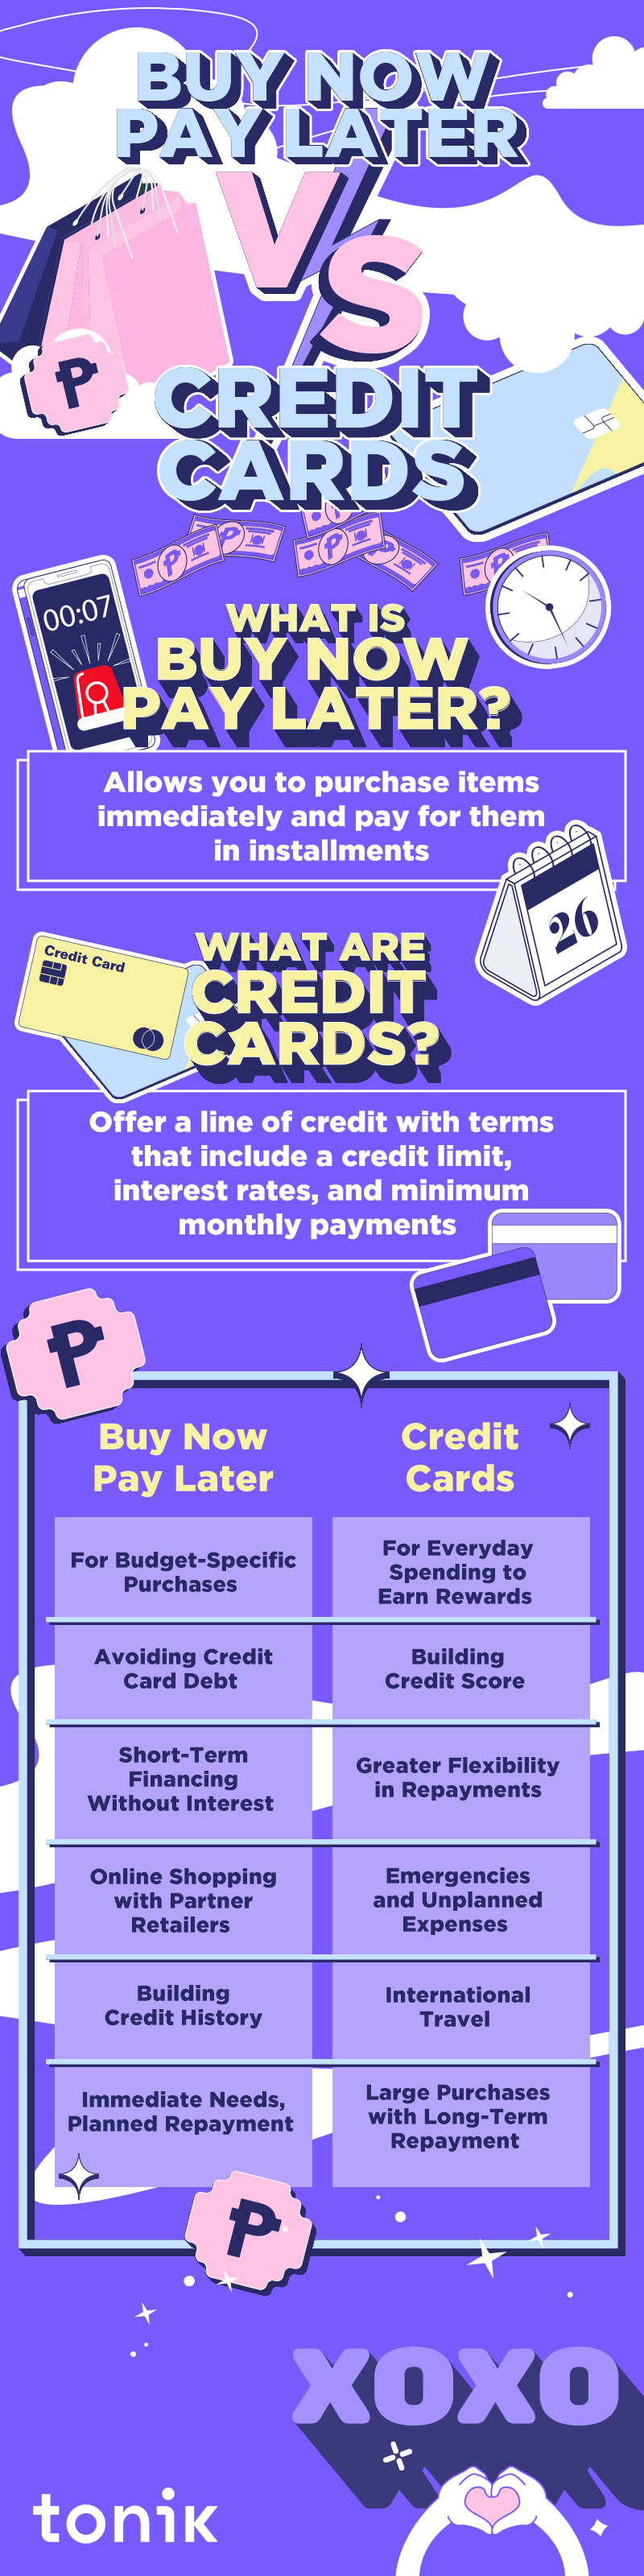 when to use credit cards vs buy now pay later